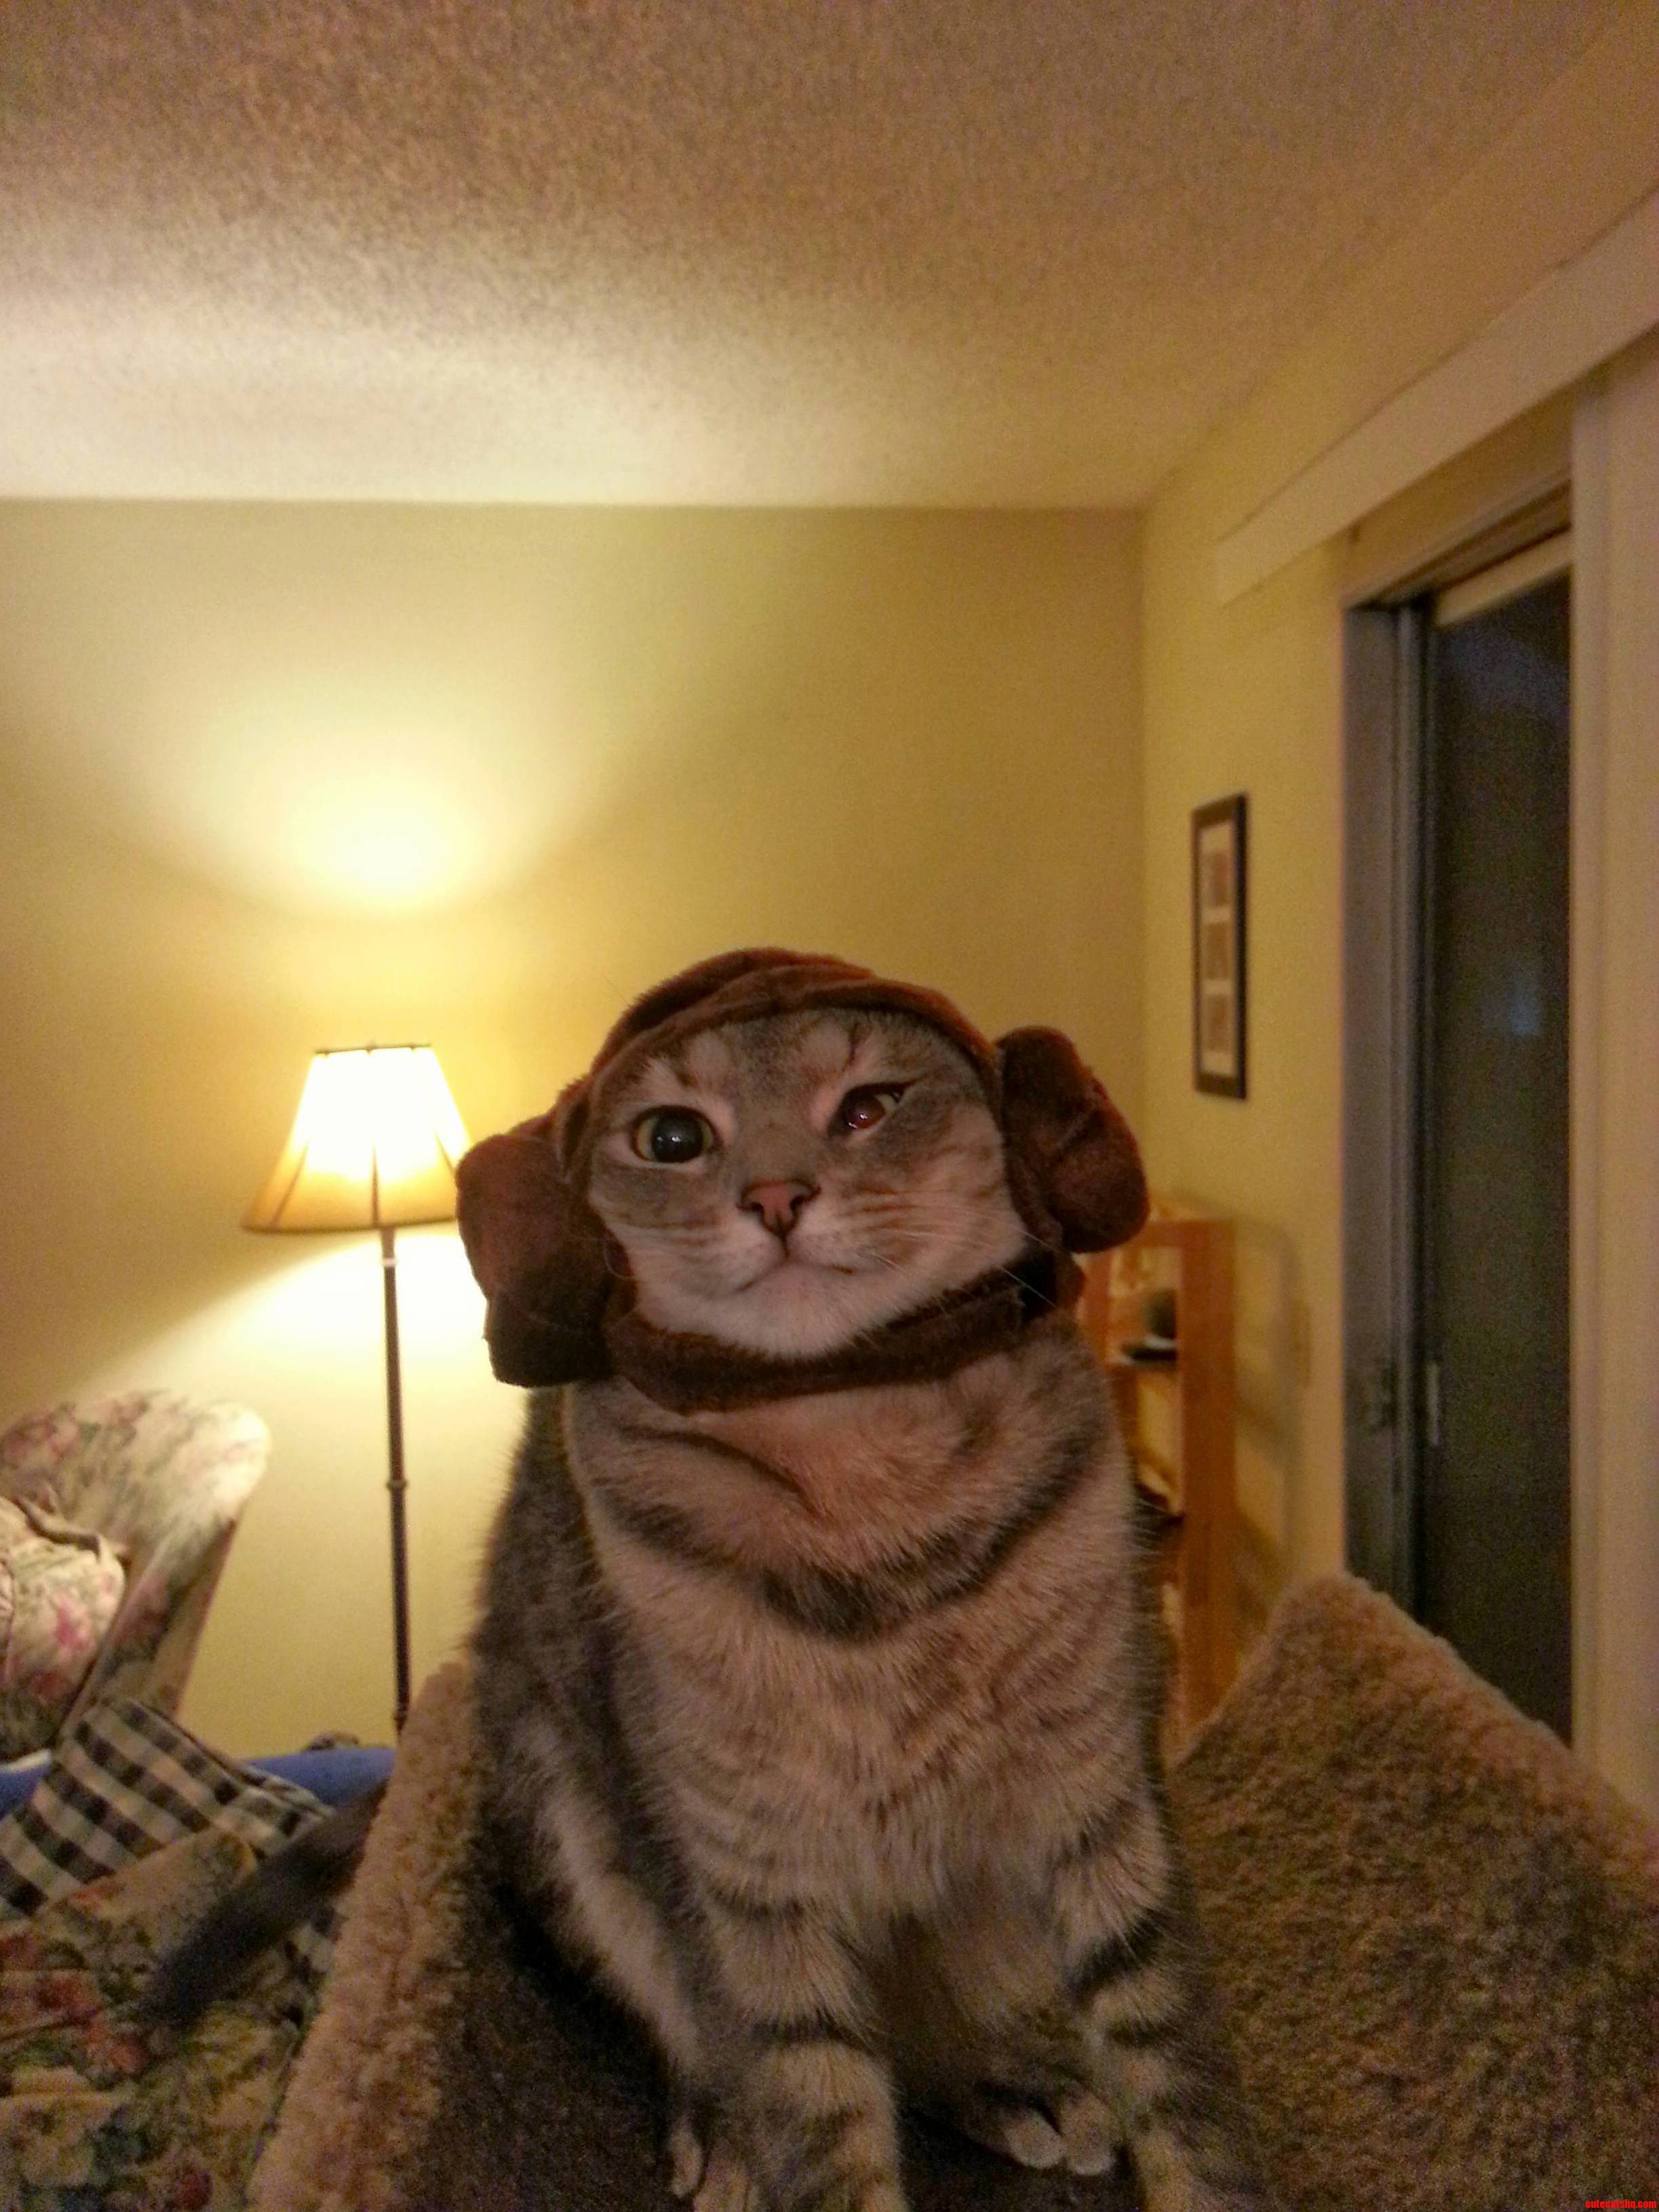 Uspicychickens Princess Leia Cat Pic From The Harrison Ford Ama